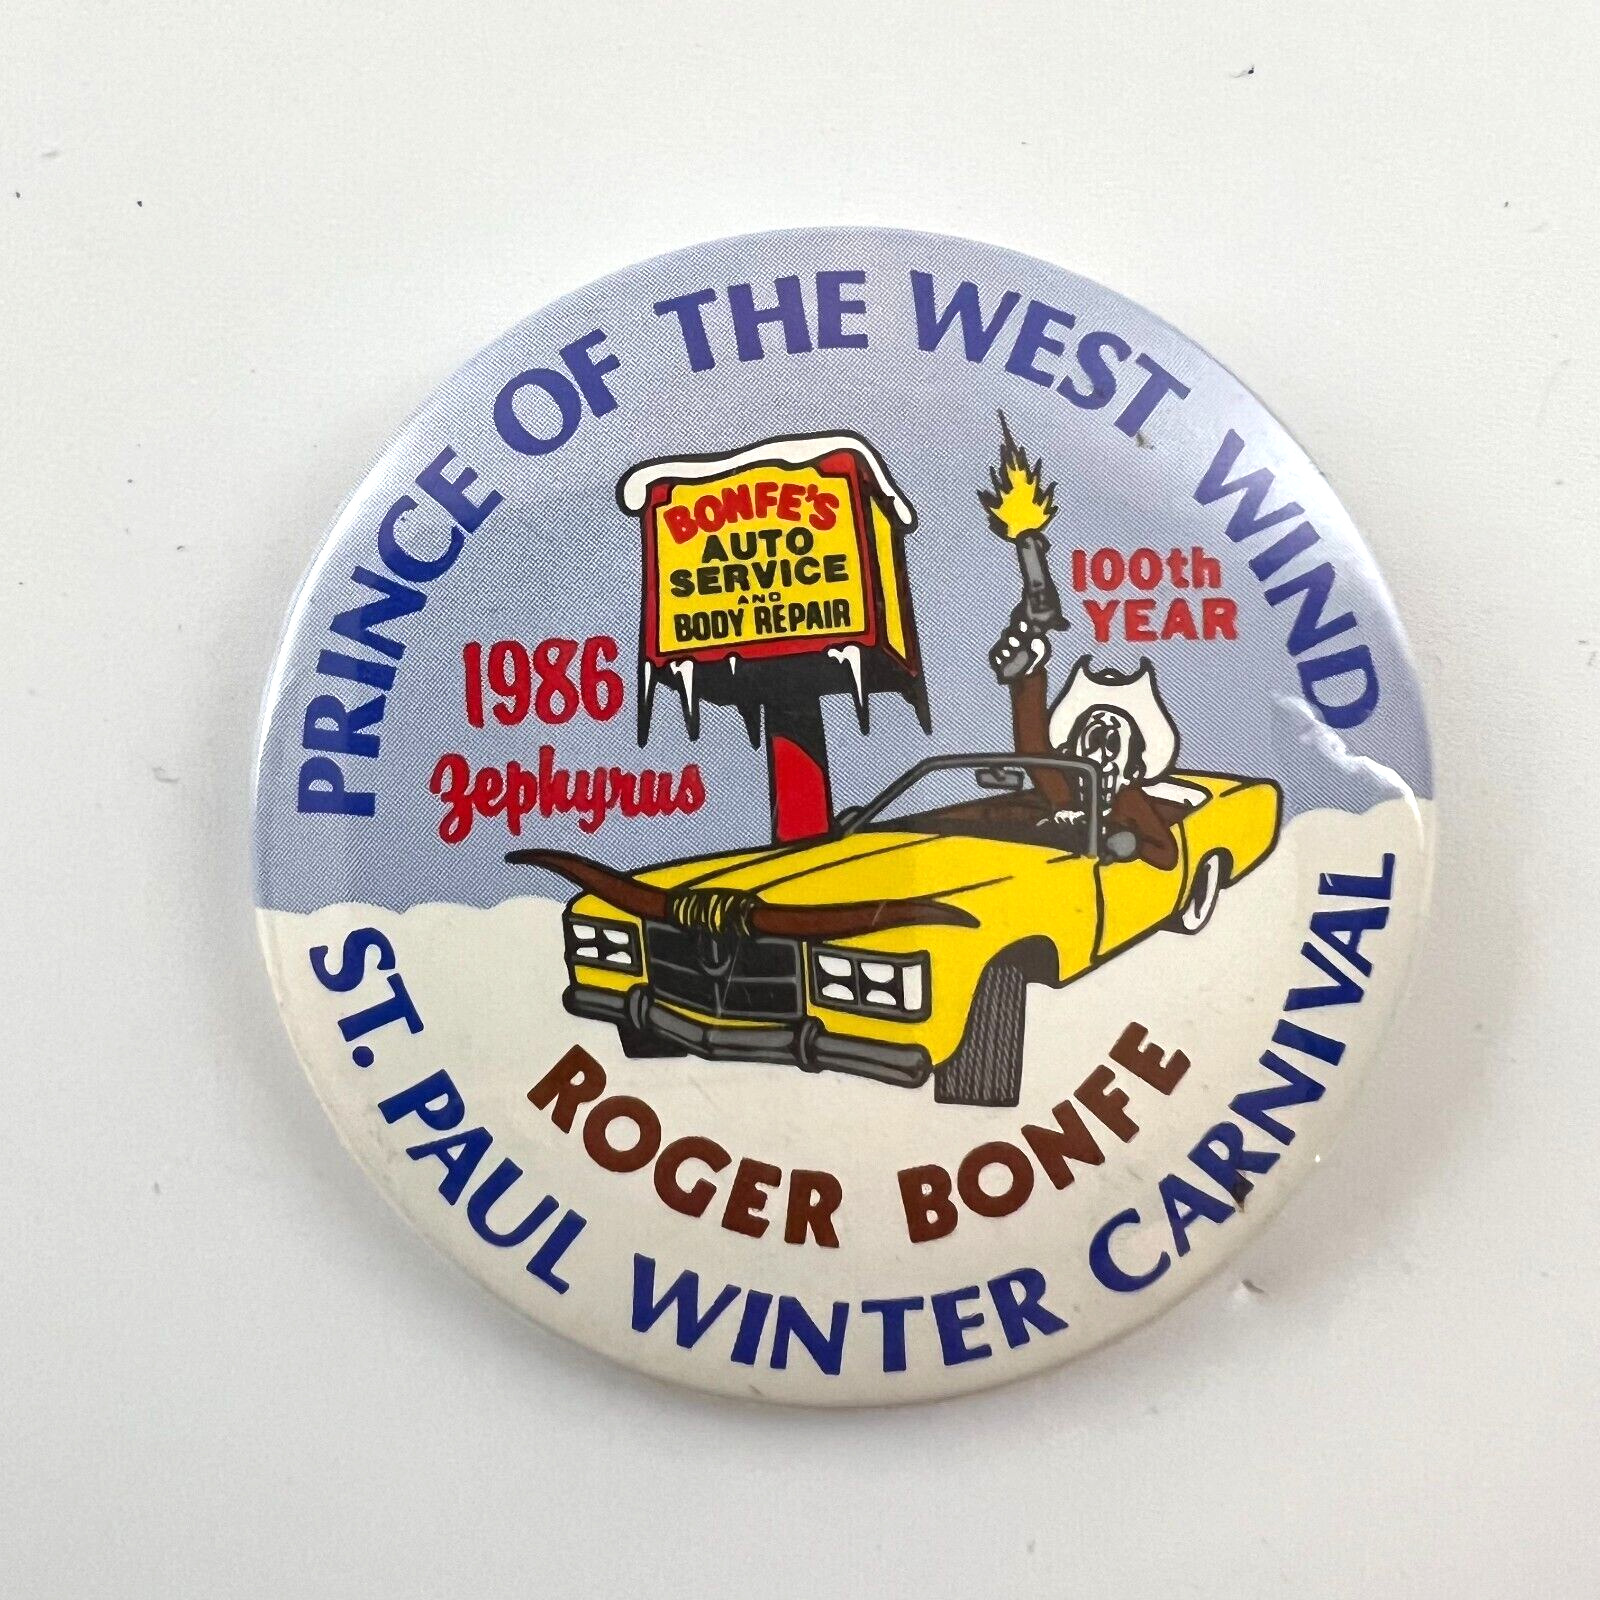 St Paul Winter Carnival 1986 Pinback Button Prince Of The West Wind 100th Year